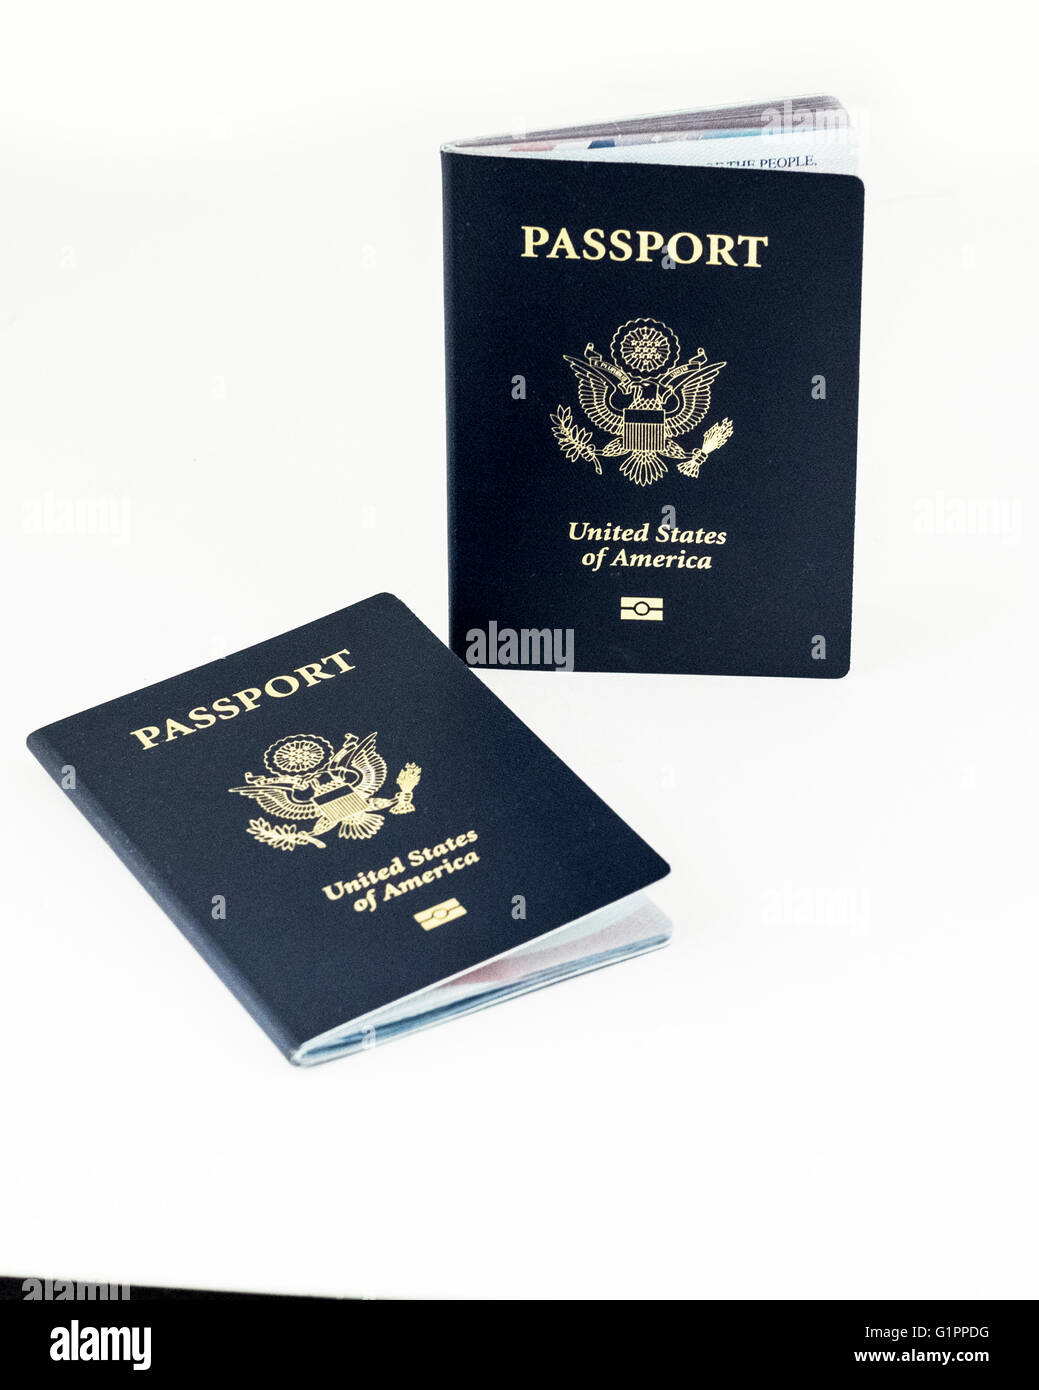 Two United States of America passport books on a white background. Stock Photo